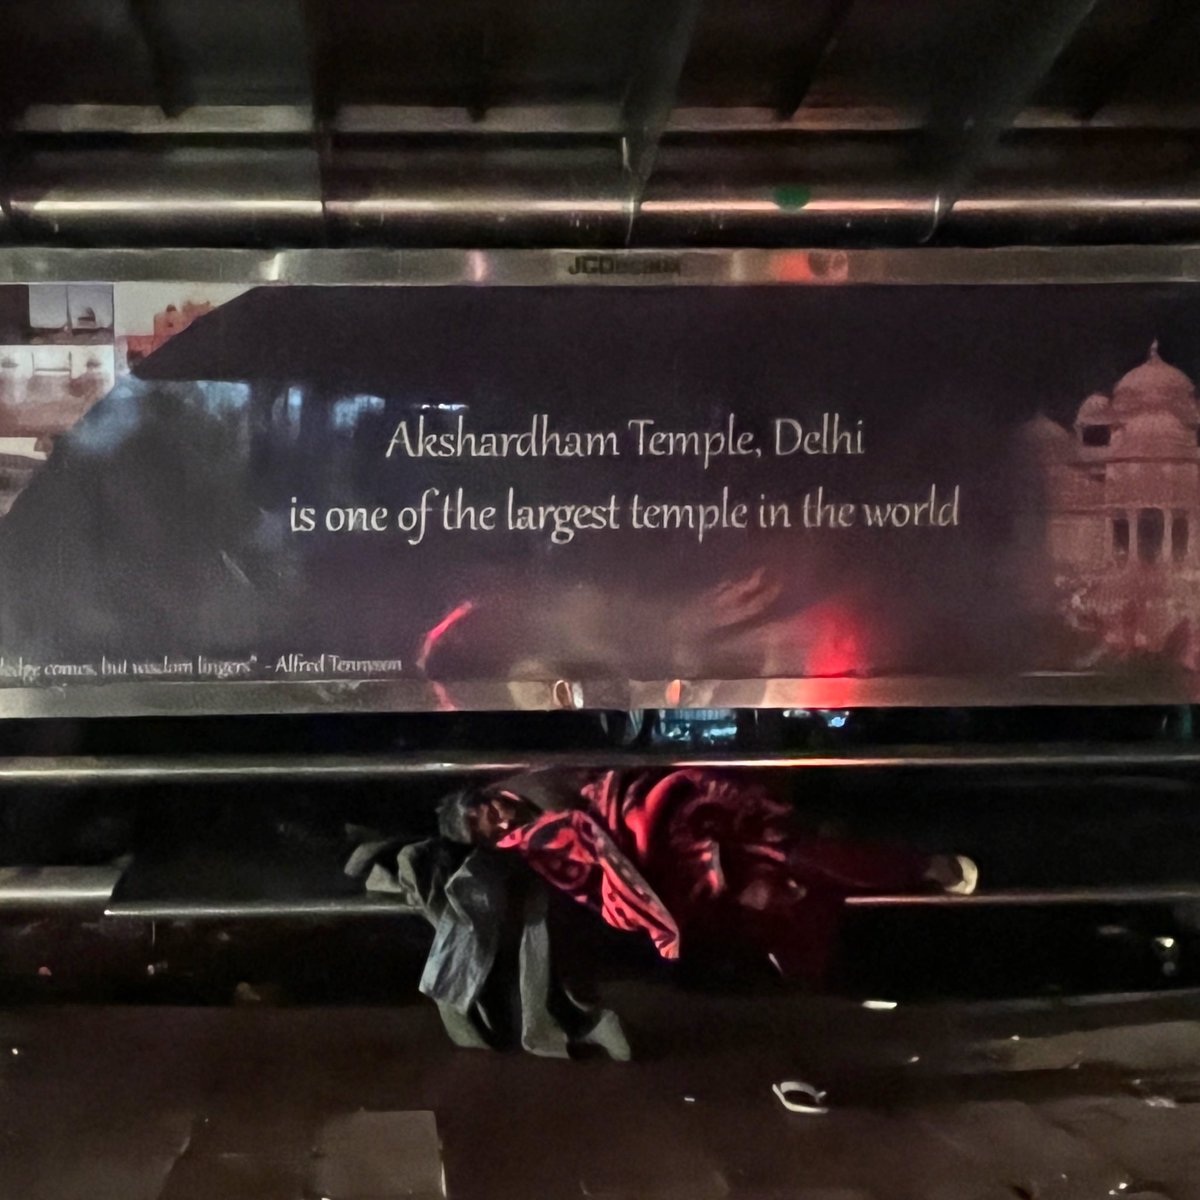 On a bench at a bus stop,
On a nameless stress,
On Winter night in Delhi
Wrapped in a shroud 
Of black and white and red and headlights!
A hoarding proclaimed - Akshardham temple Delhi ,
Is one of the largest temples in the world.

#homelessless #delhi #urbanism #worldrecords